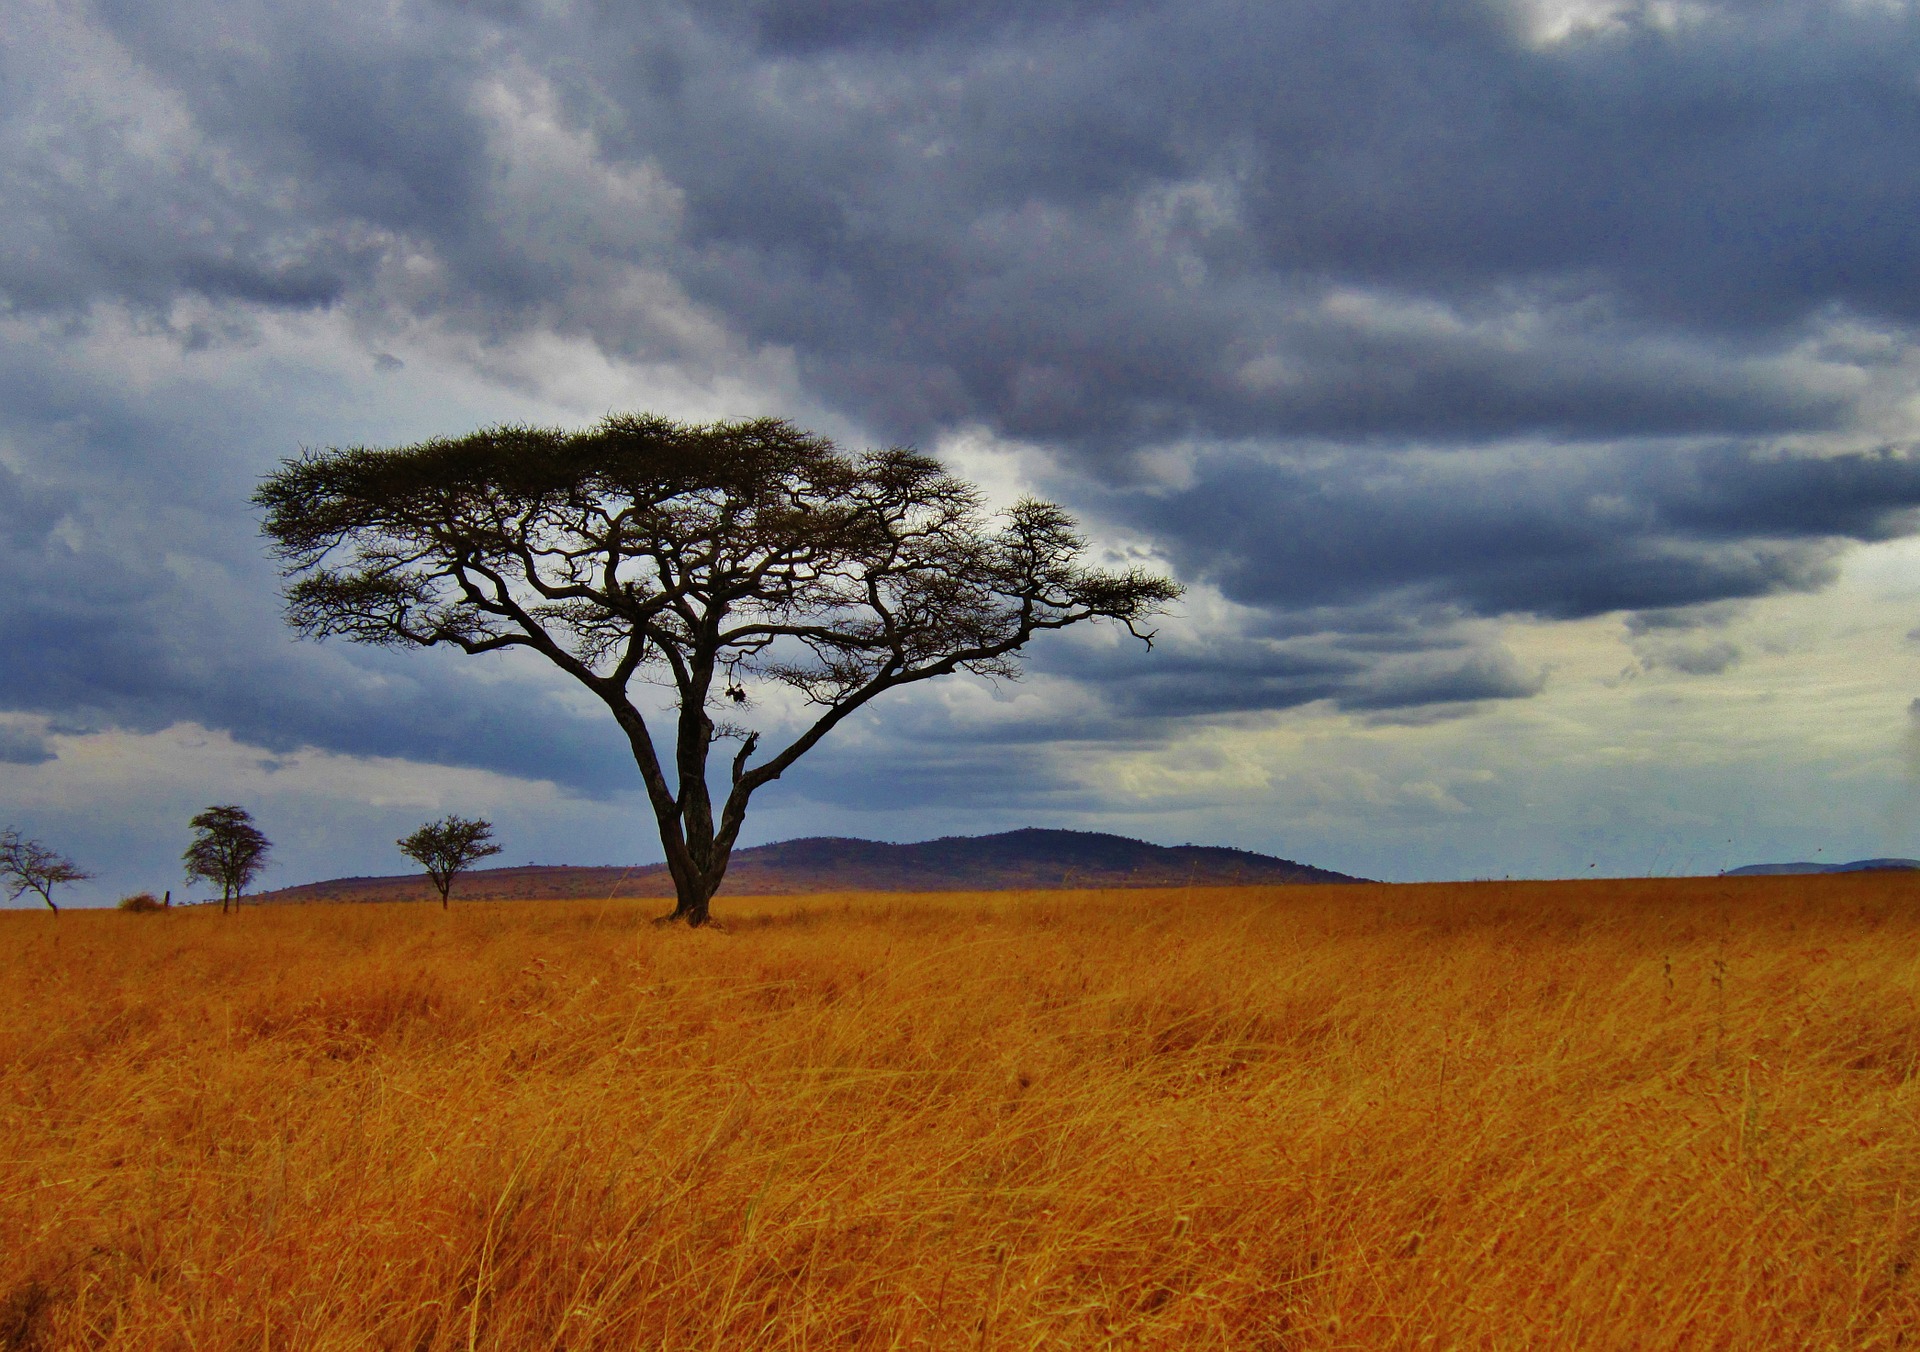 Tanzania, a cultural and natural heritage to discover